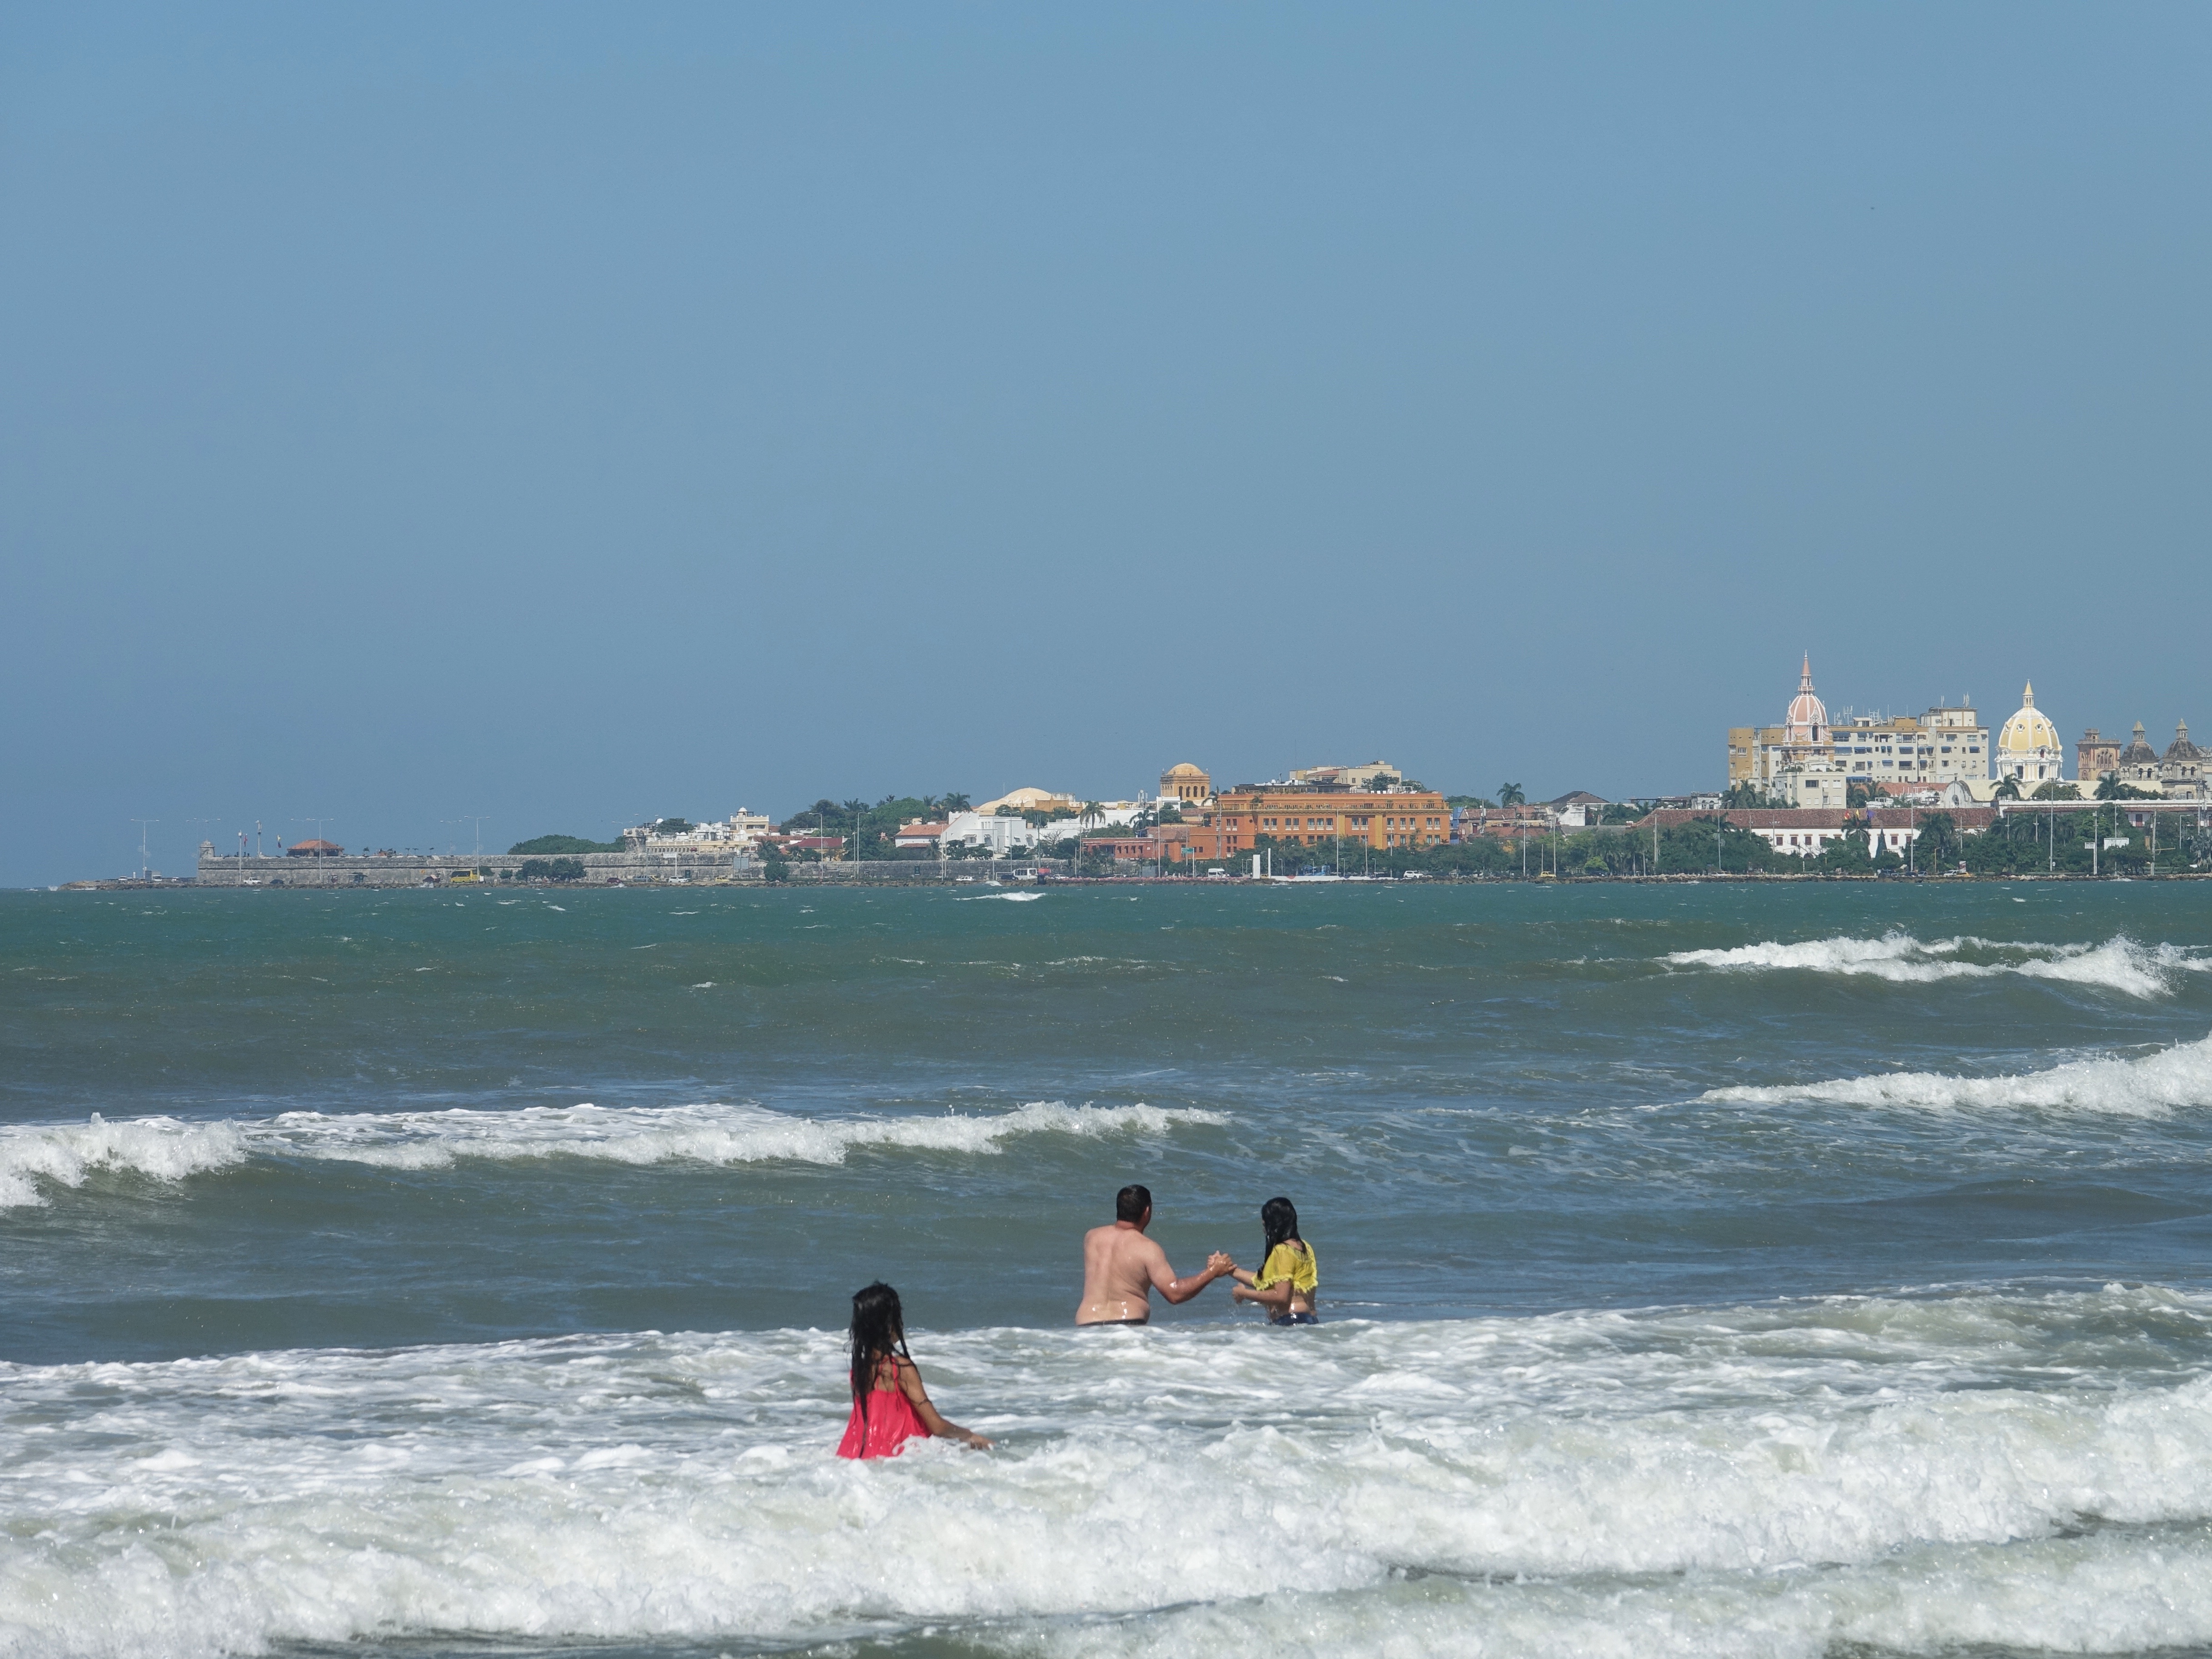 View of the Walled City from BocaGrande beach